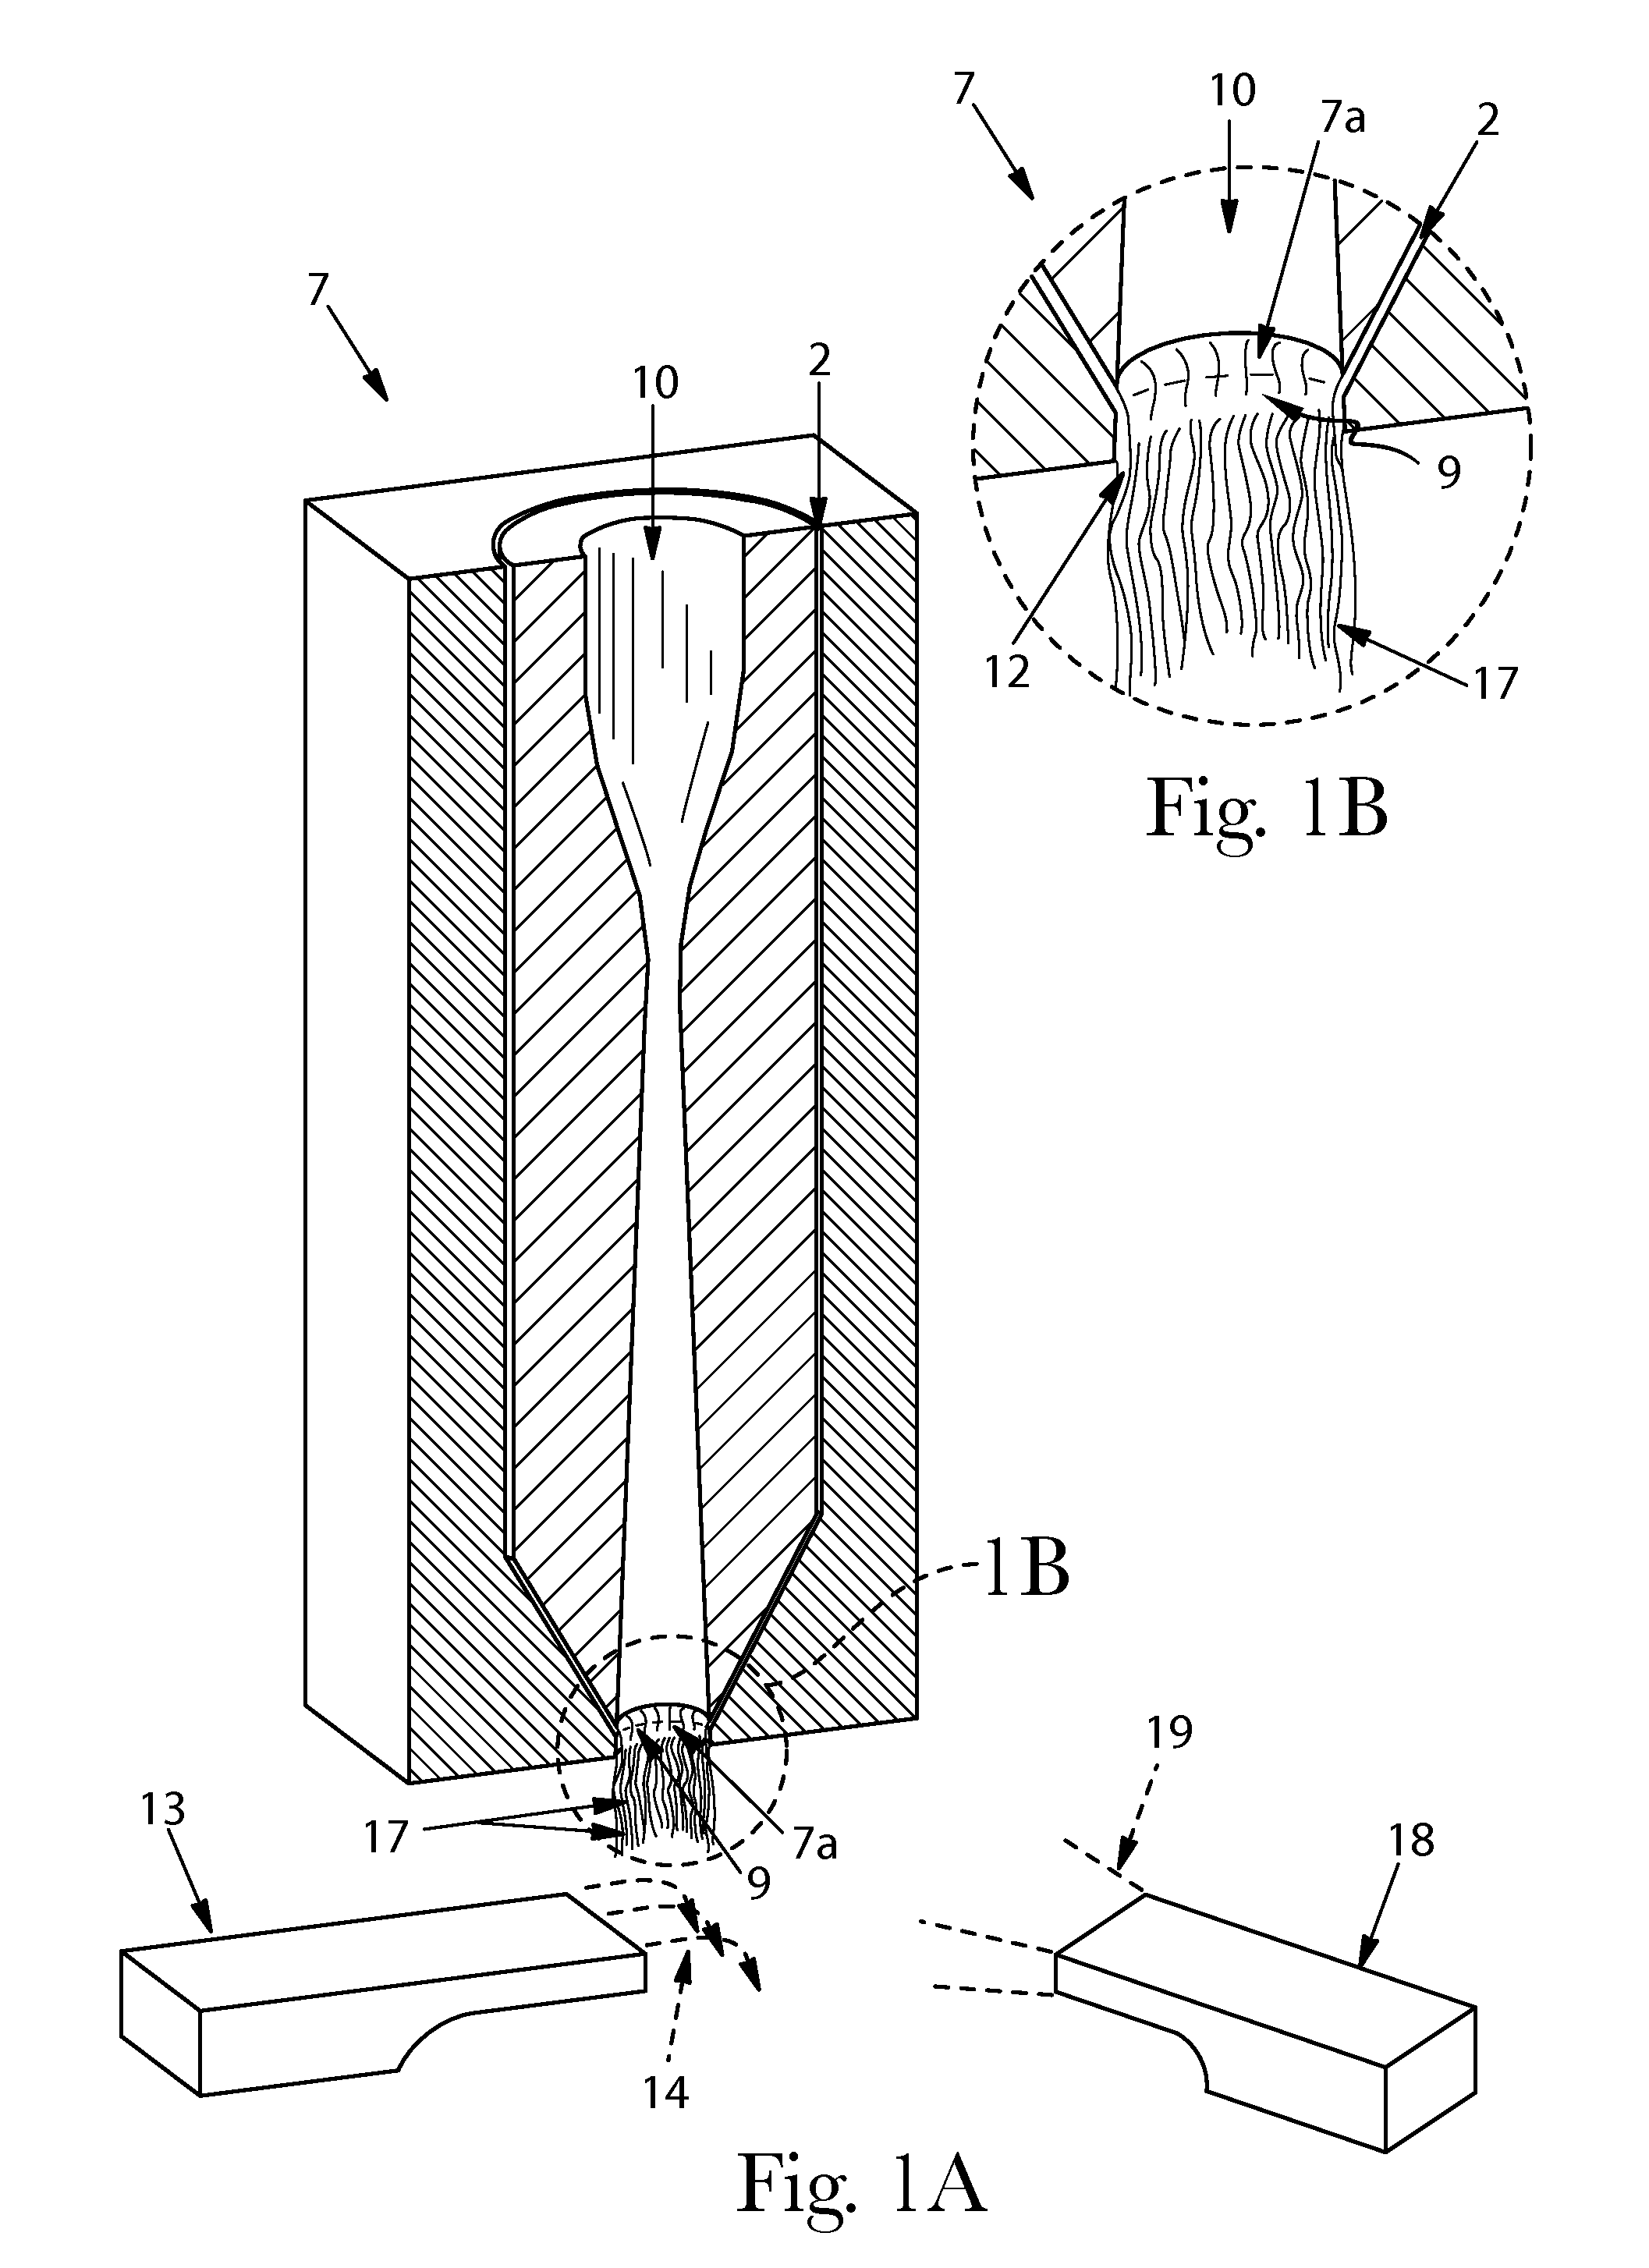 Methods of Delivering a Health Care Active by Administering Personal Health Care Articles Comprising a Filament